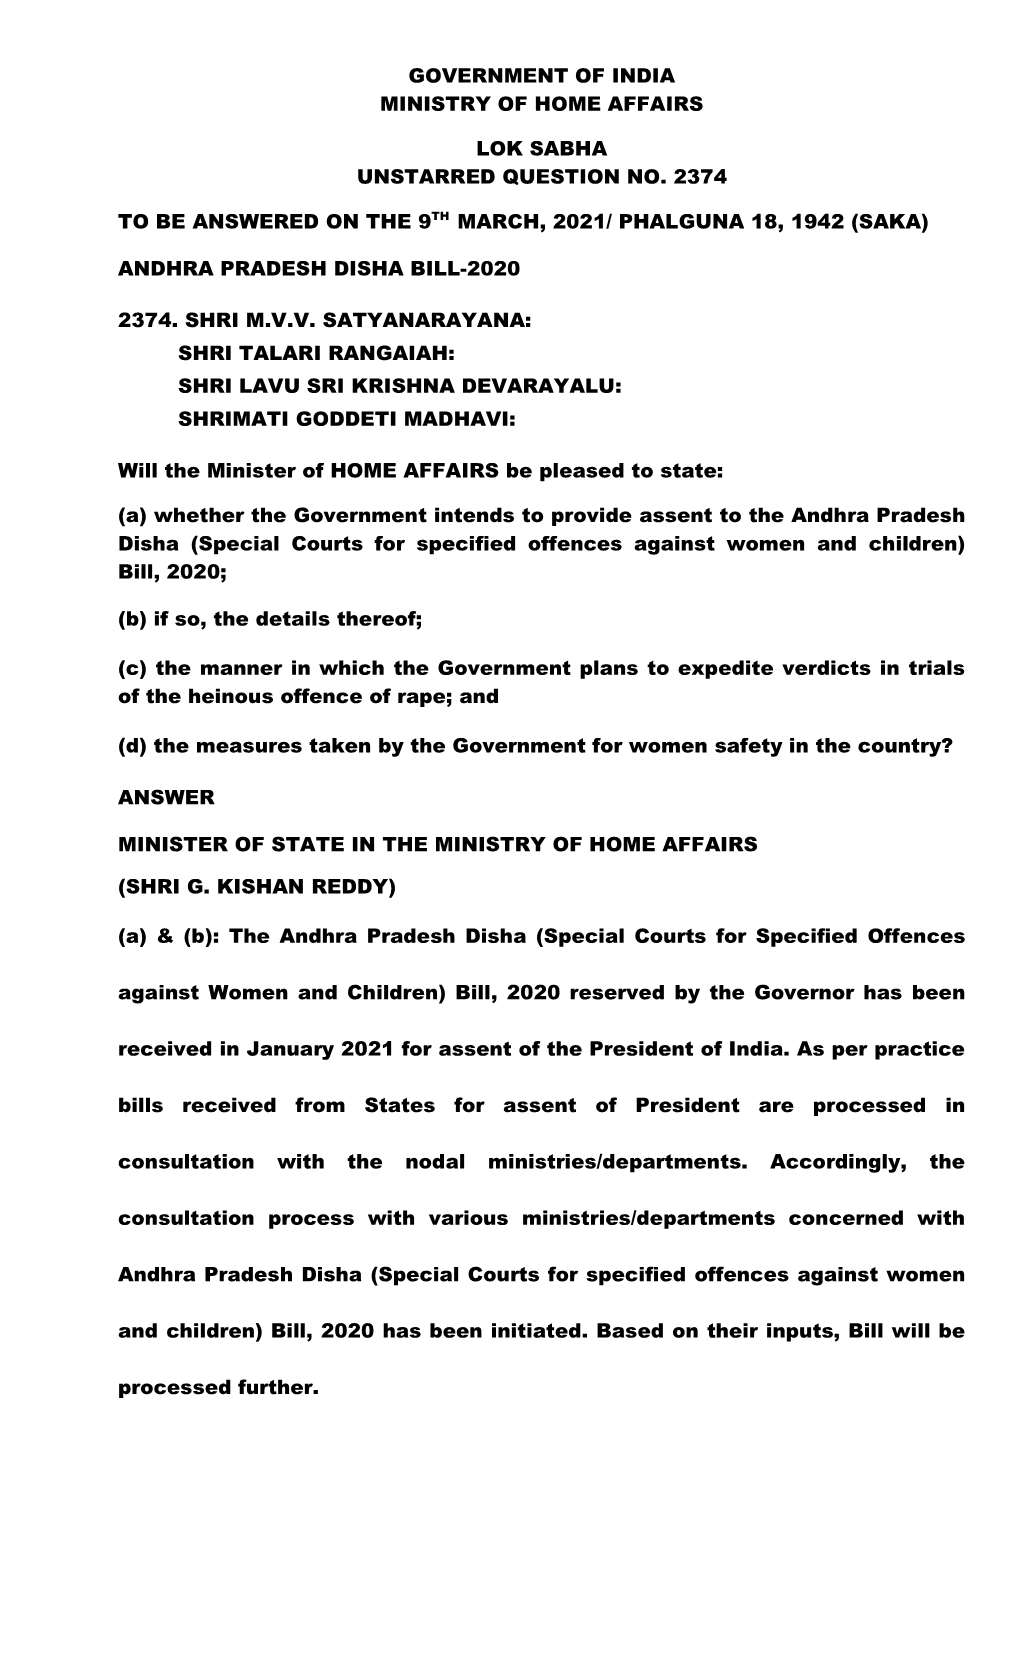 Government of India Ministry of Home Affairs Lok Sabha Unstarred Question No. 2374 to Be Answered on the 9Th March, 2021/ Phalg